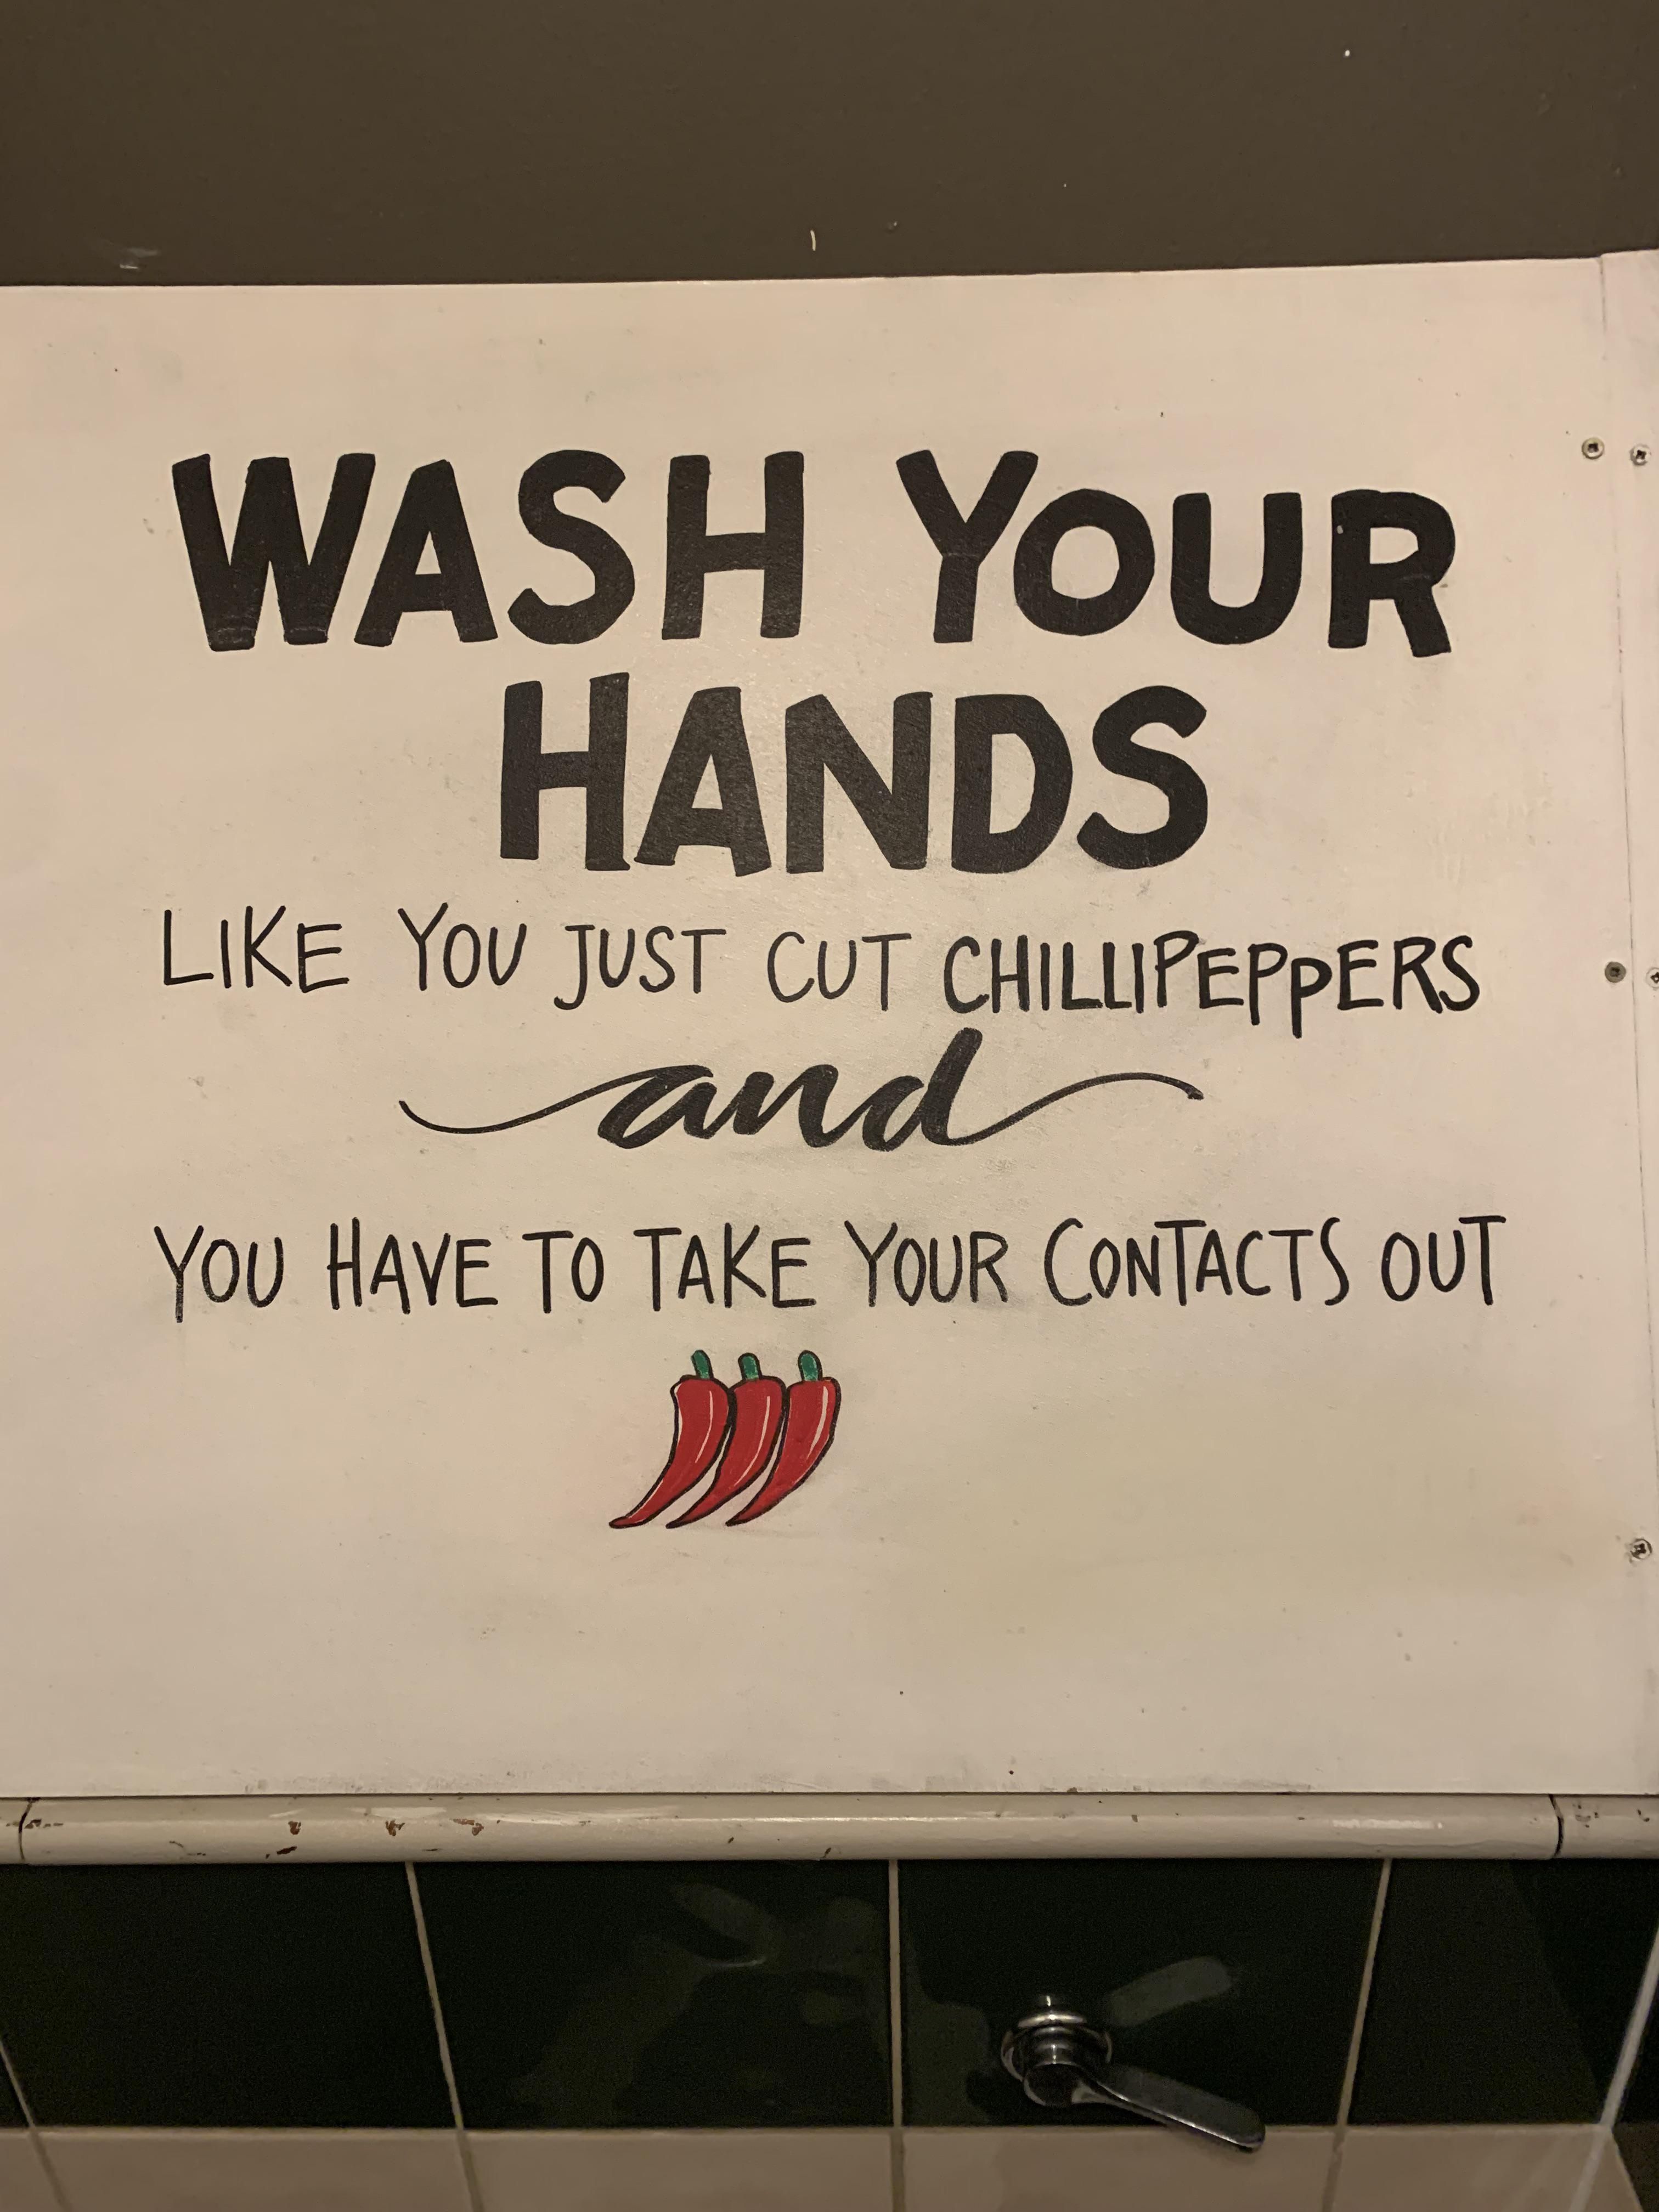 This “wash your hands” toilet sign…